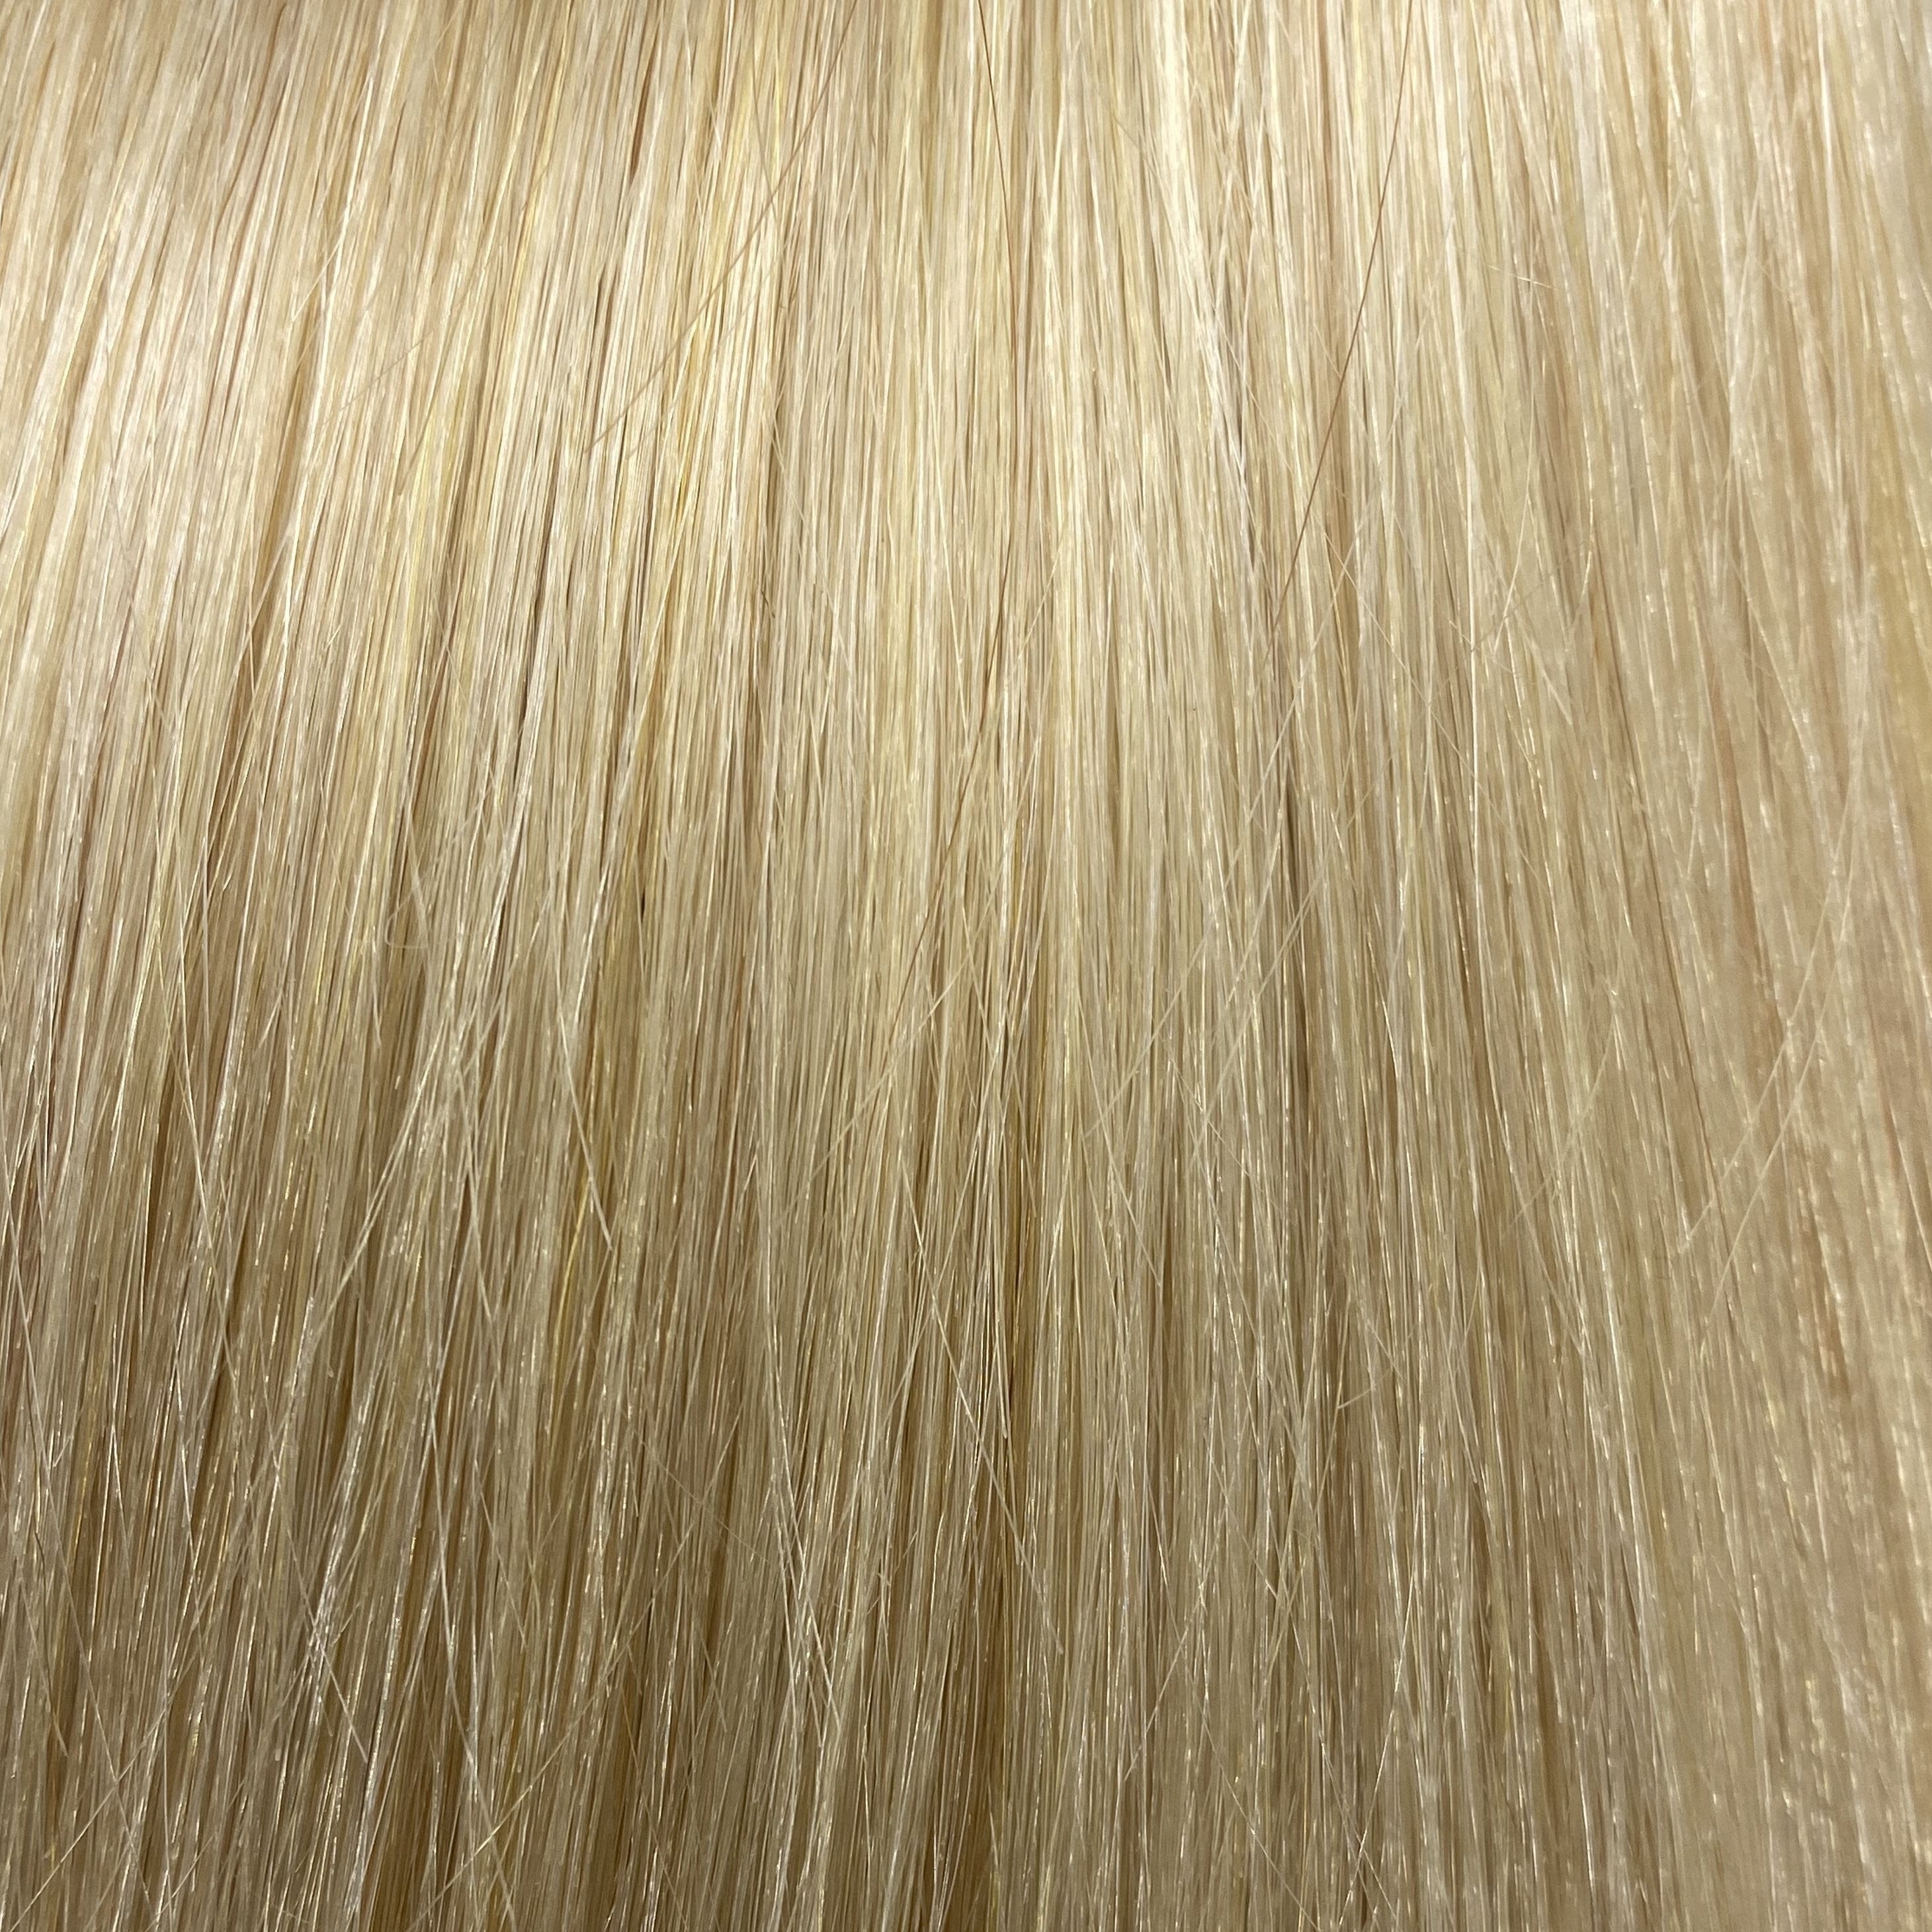 Velo #1004 - 16 Inches - Platinum Blonde - 170 Grams | clip in hair extensions